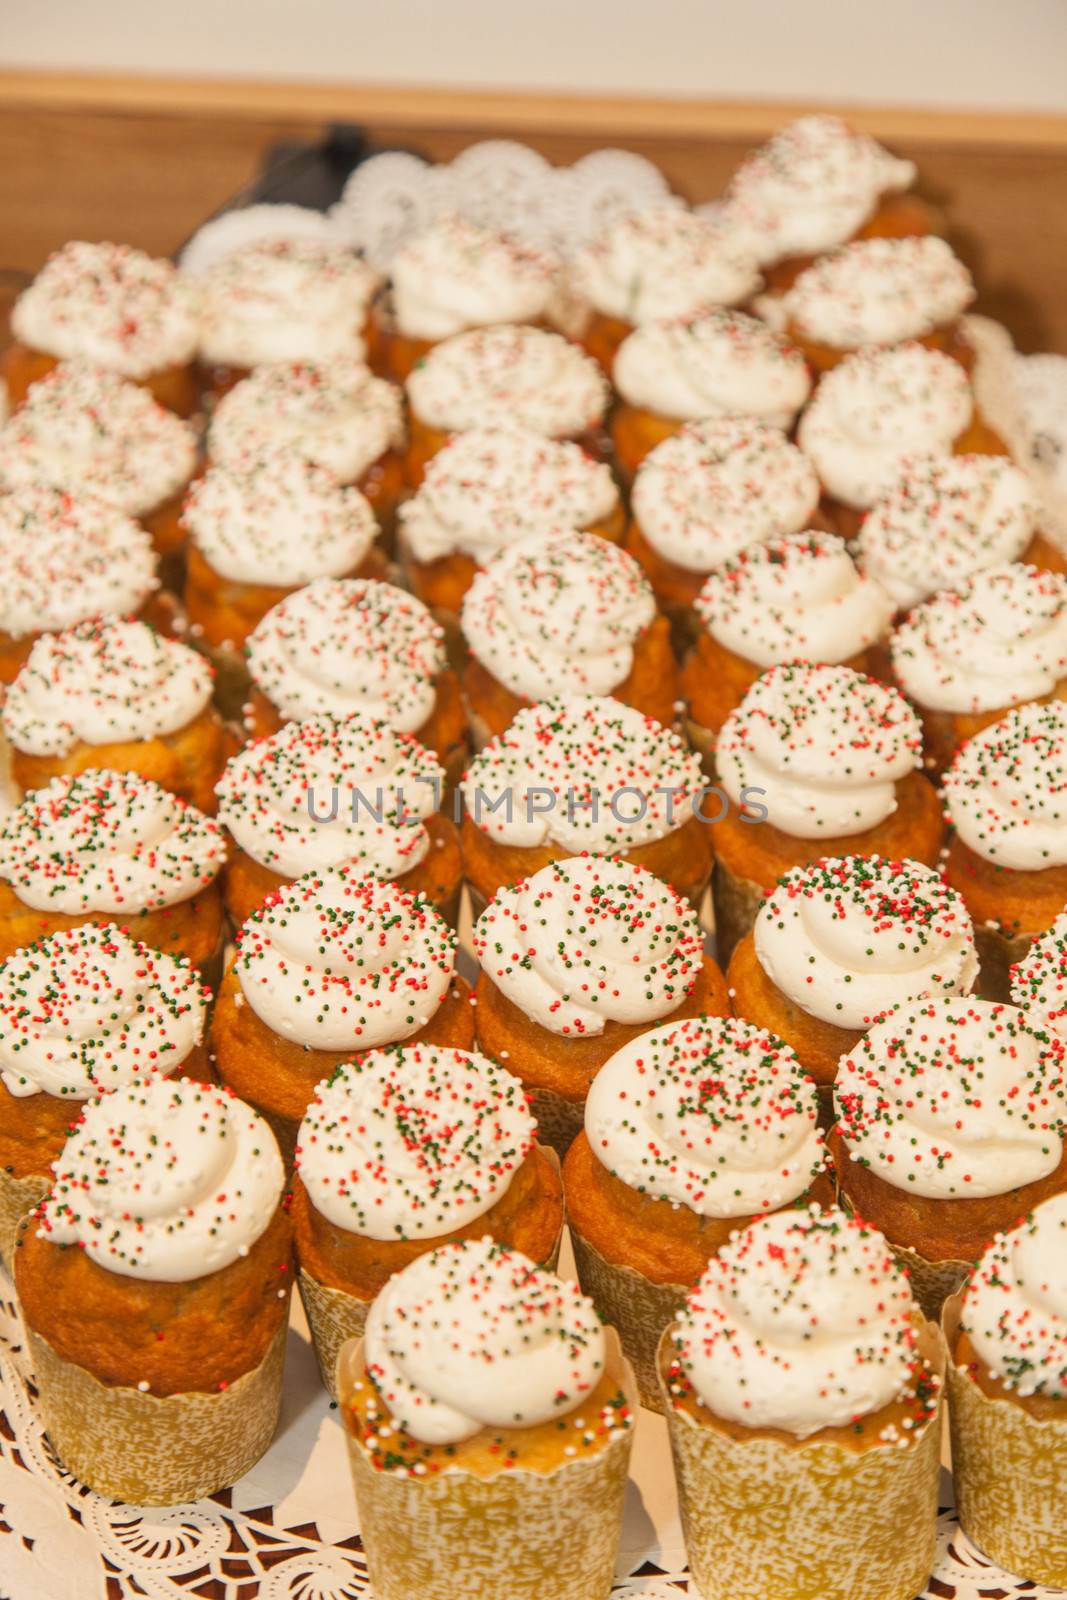 Large tray of delicious cupcakes during end of the year celebration party.